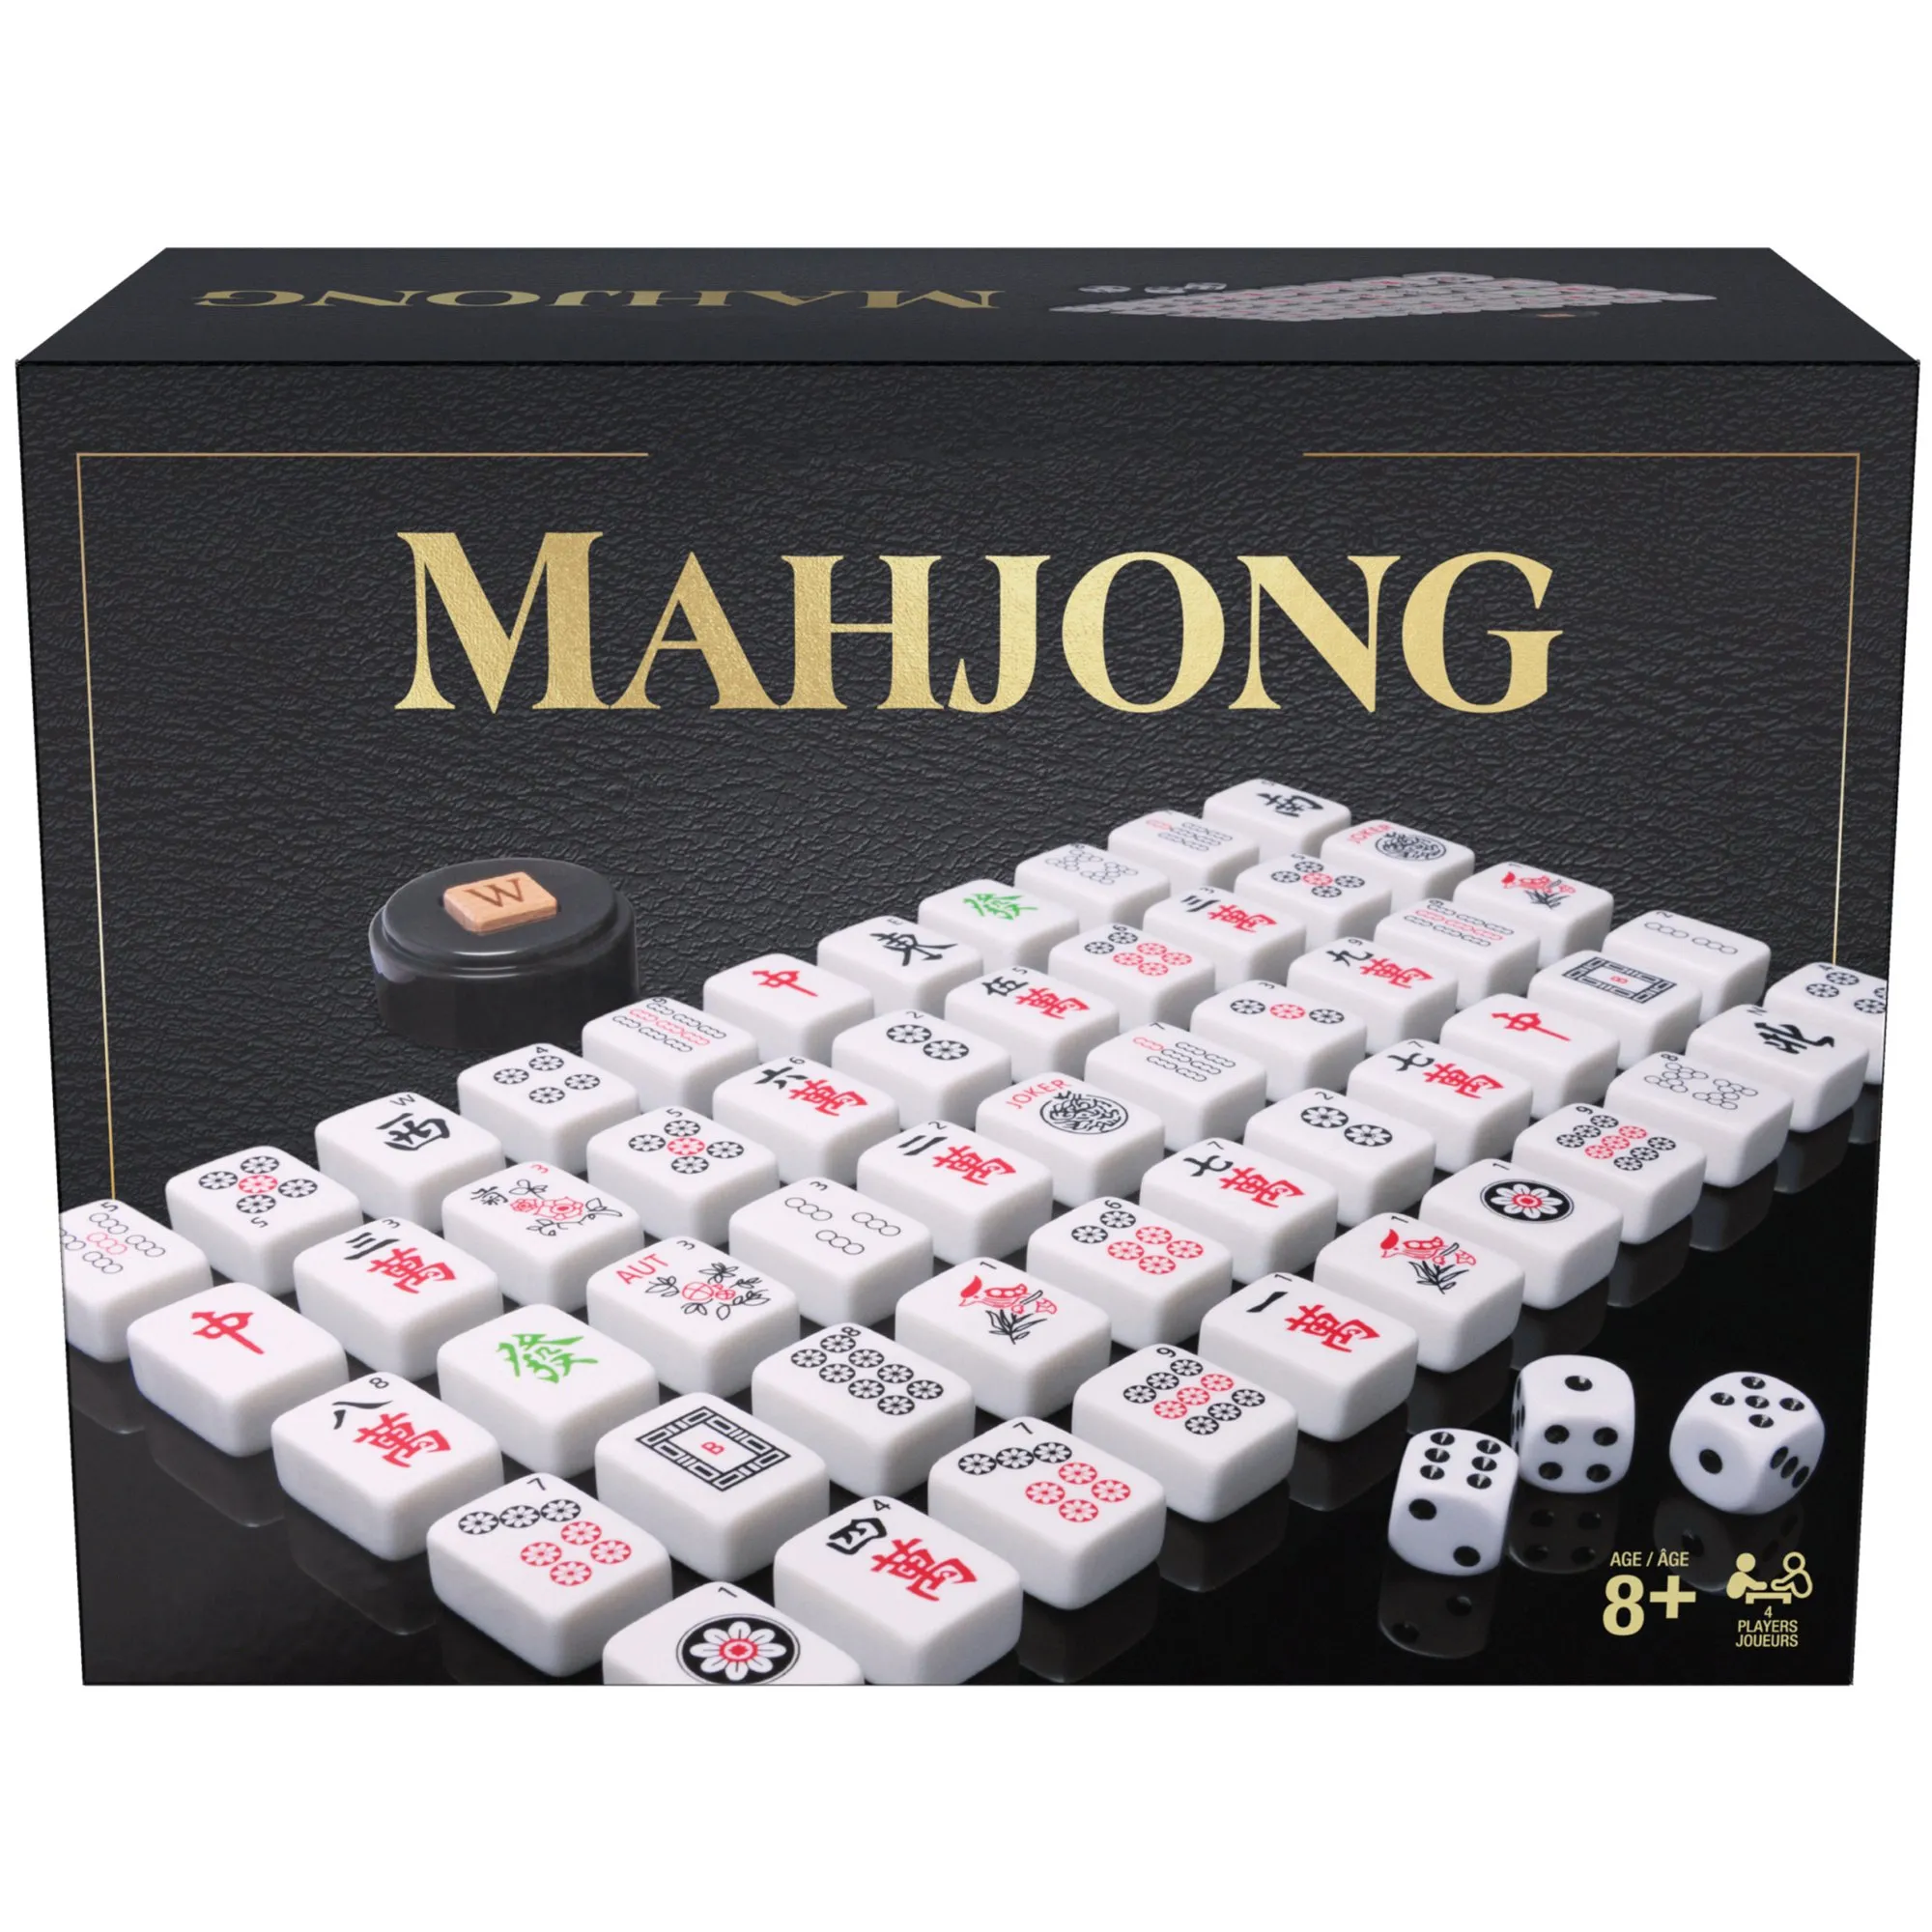 Mahjong Classic Strategy Game For Kids Families And Adults Ages 8 And Up